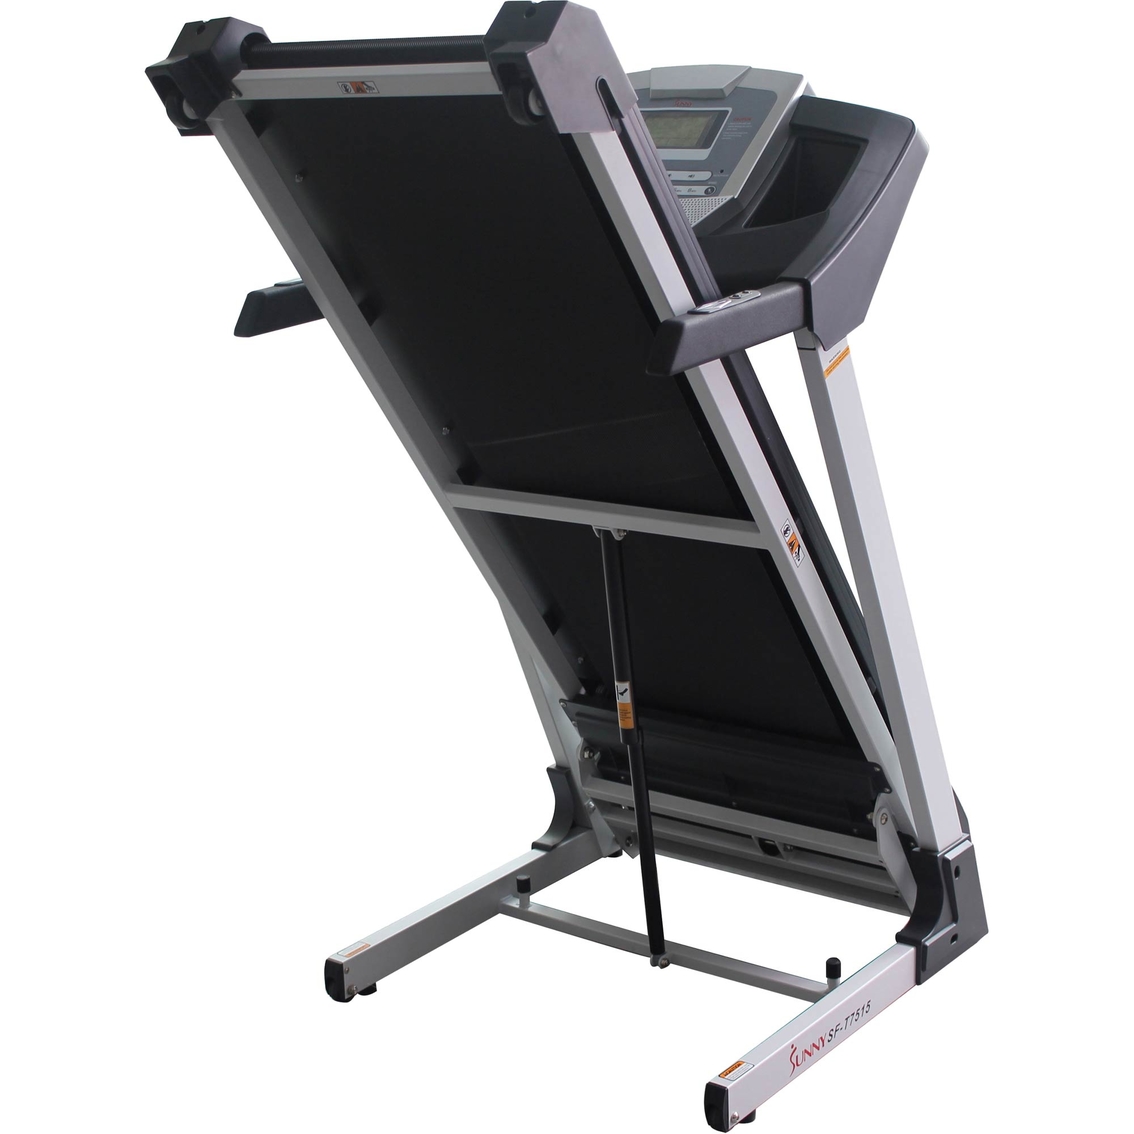 Sunny Health & Fitness SF-T7515 Smart Treadmill with Auto Incline - Image 2 of 4